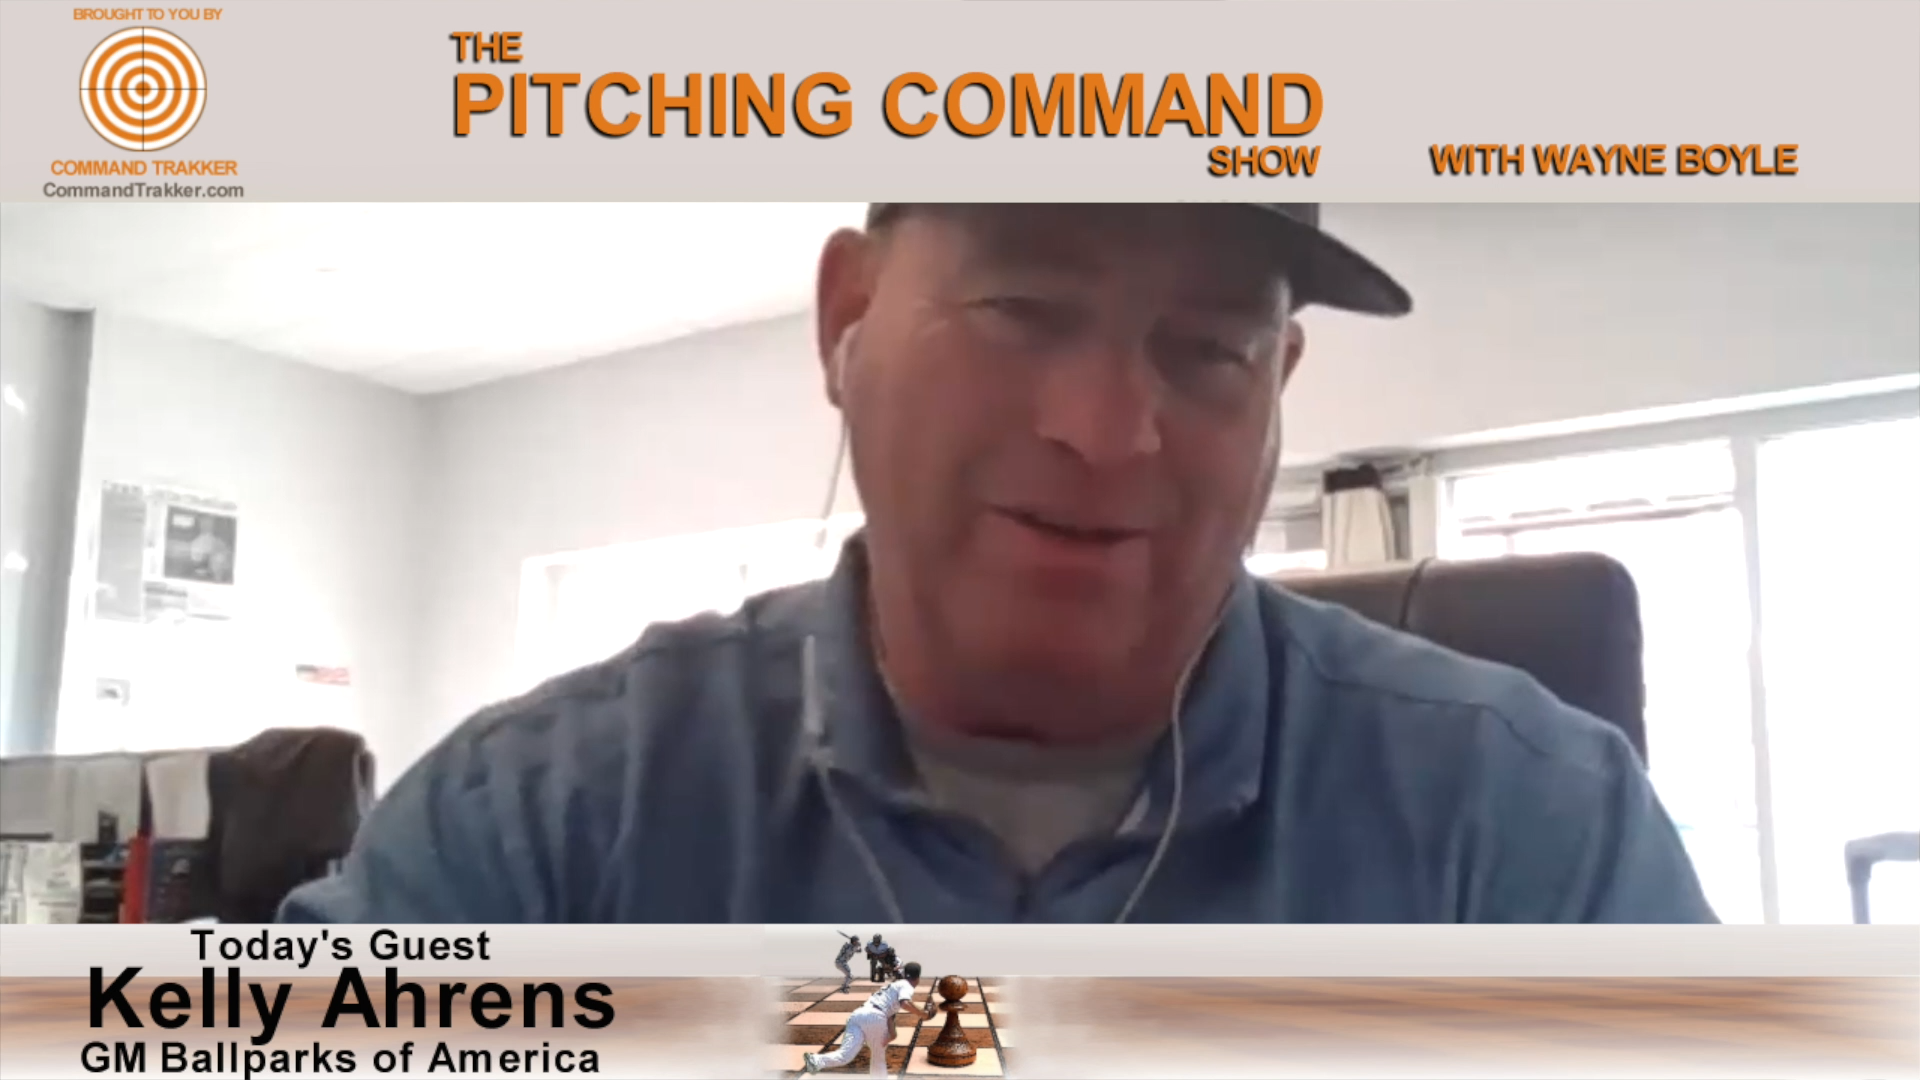 The Pitching Command Show